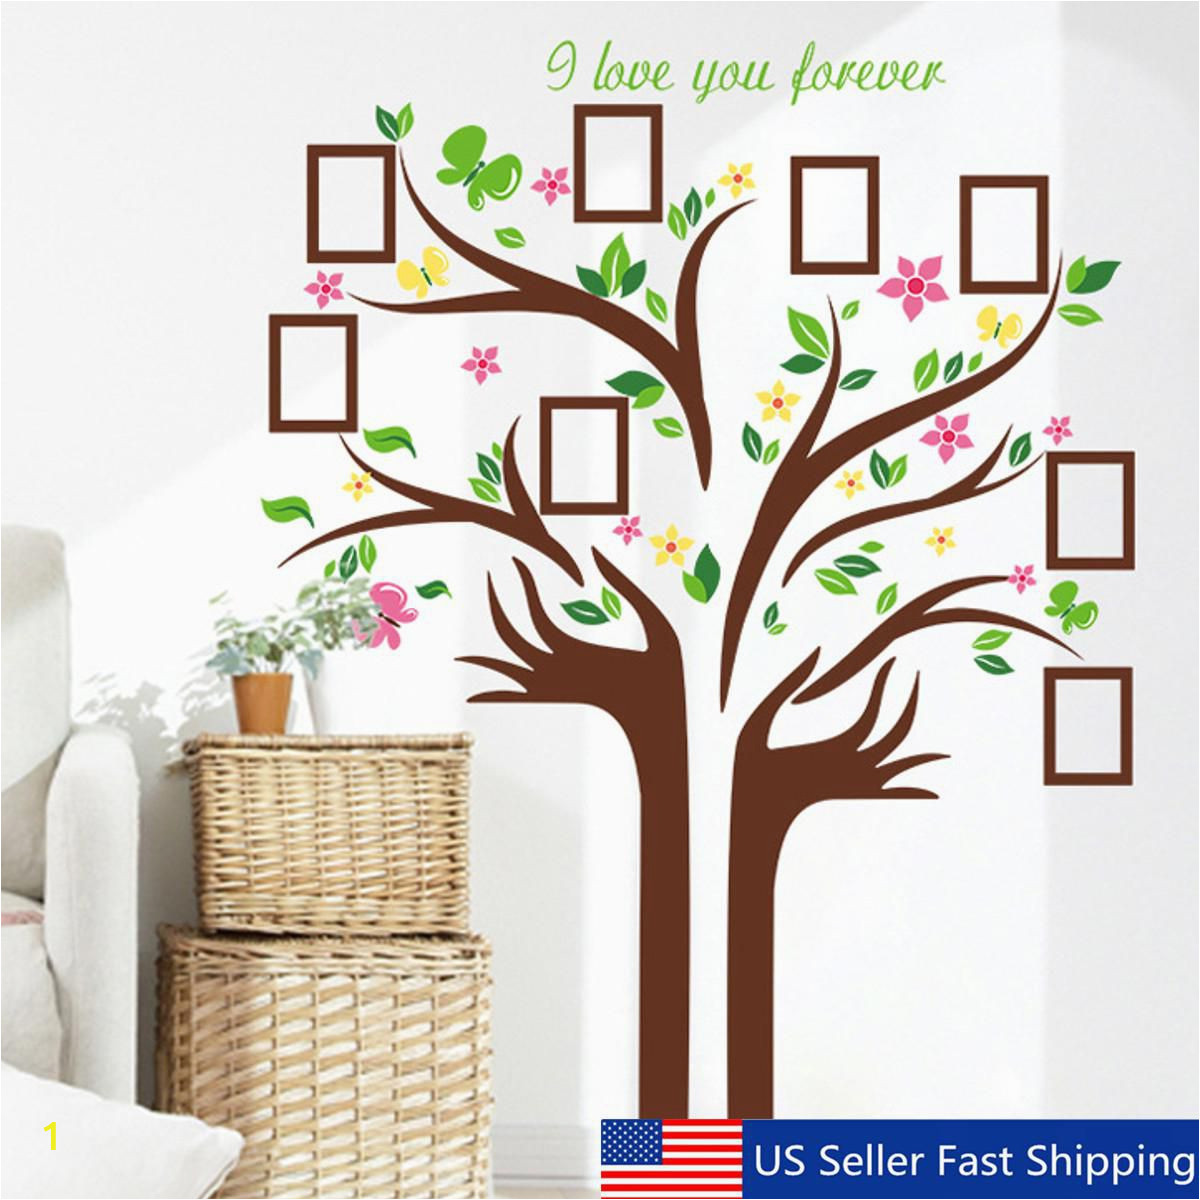 Make A Wall Mural Us Family Tree butterfly Wall Sticker Picture Frame